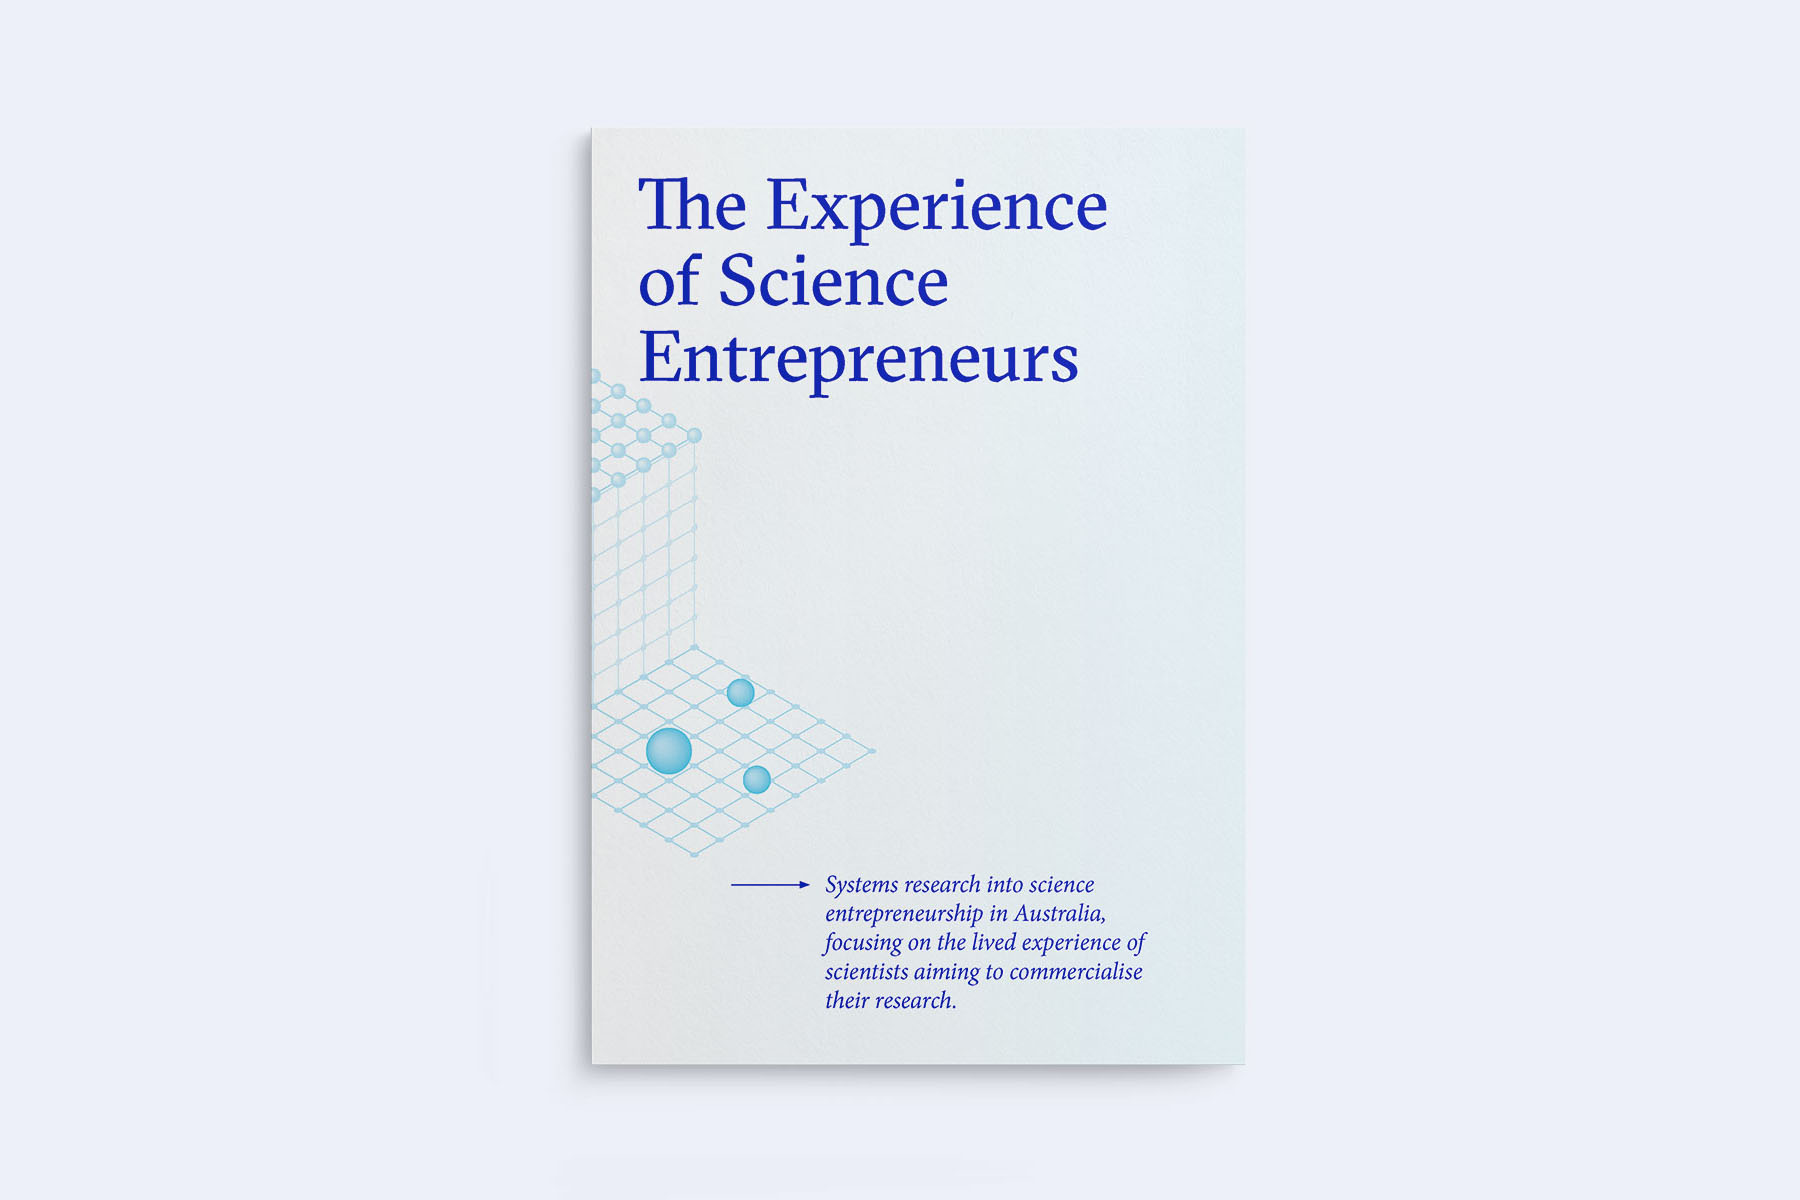 The front cover of the Experience of Science Entrepreneurs report.